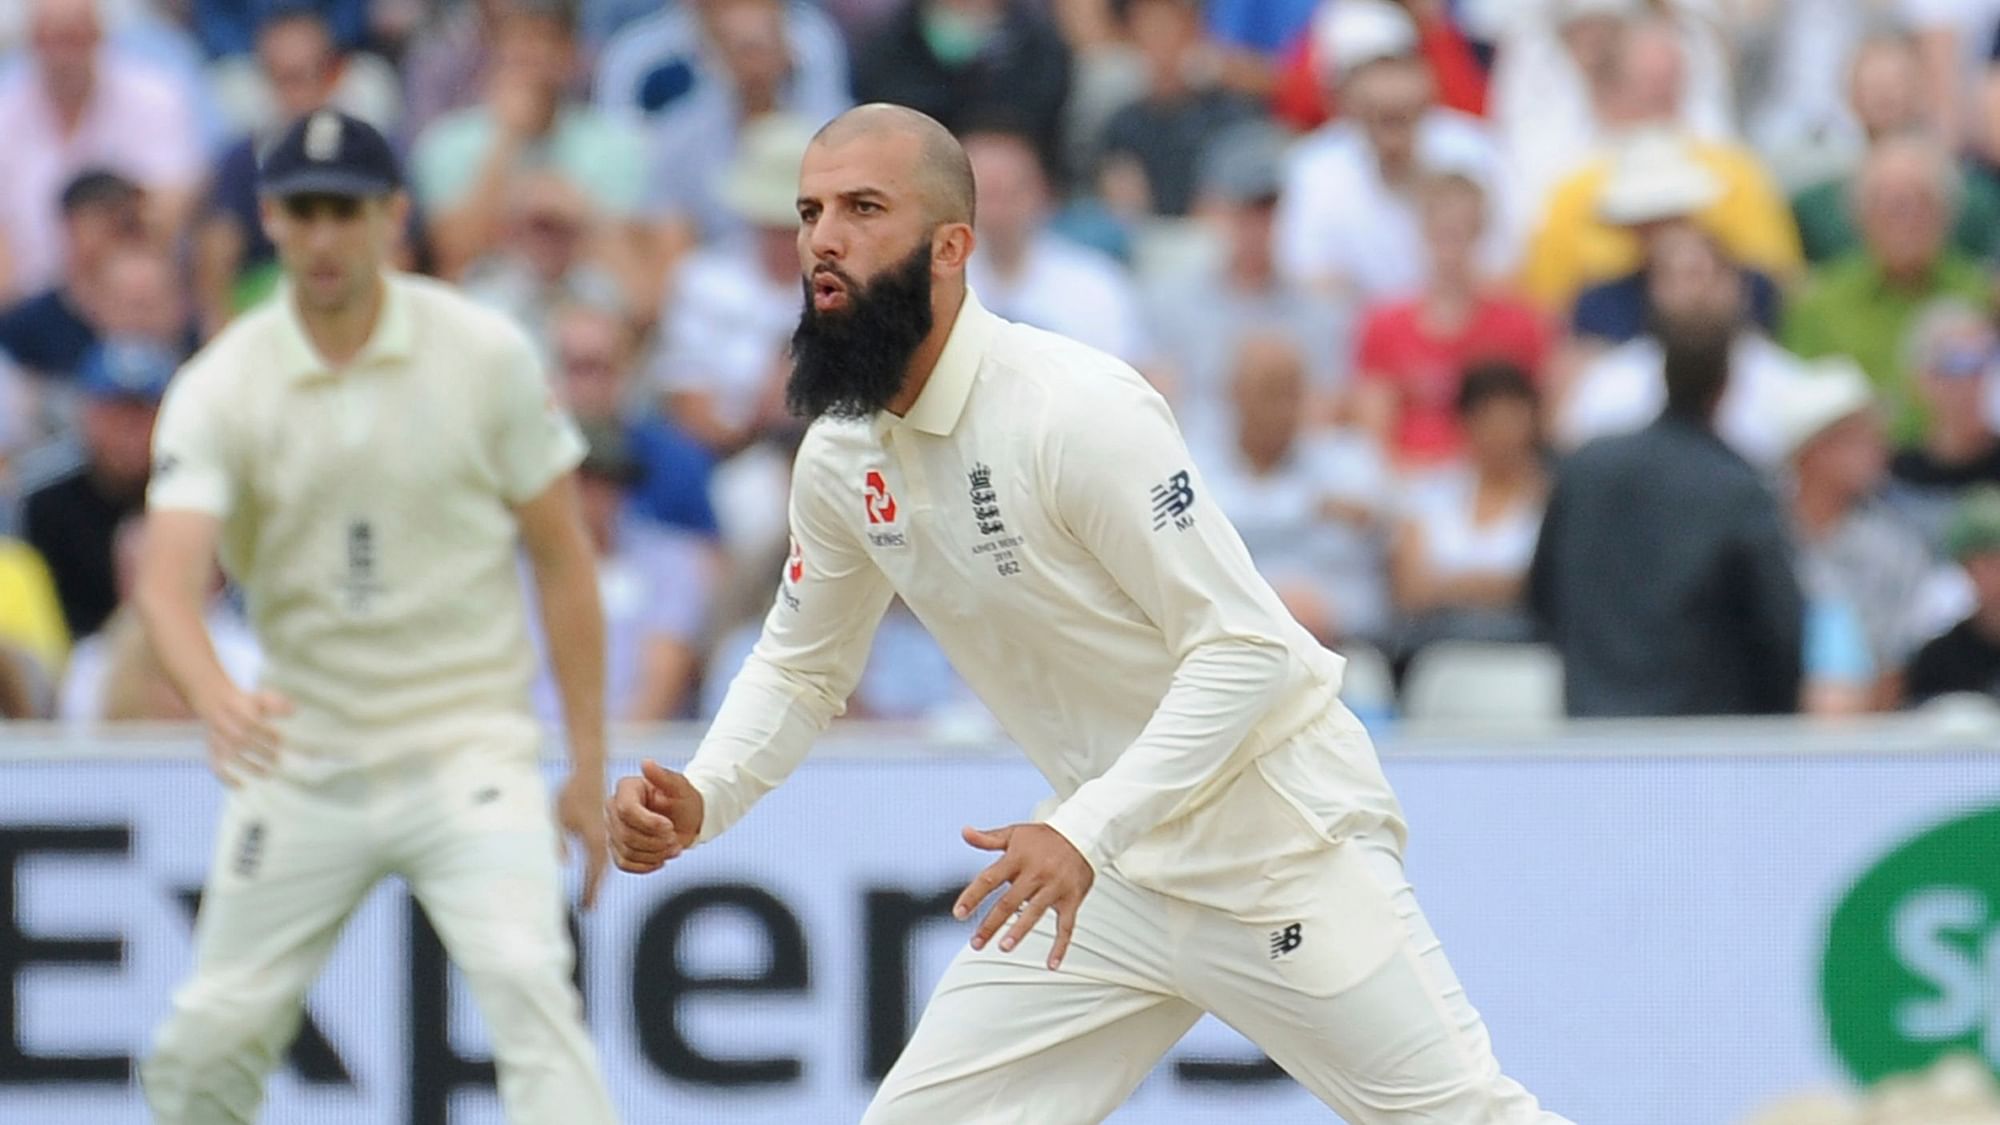 England all-rounder Moeen Ali will take a “short break” from cricket after being dropped from the Test squad.